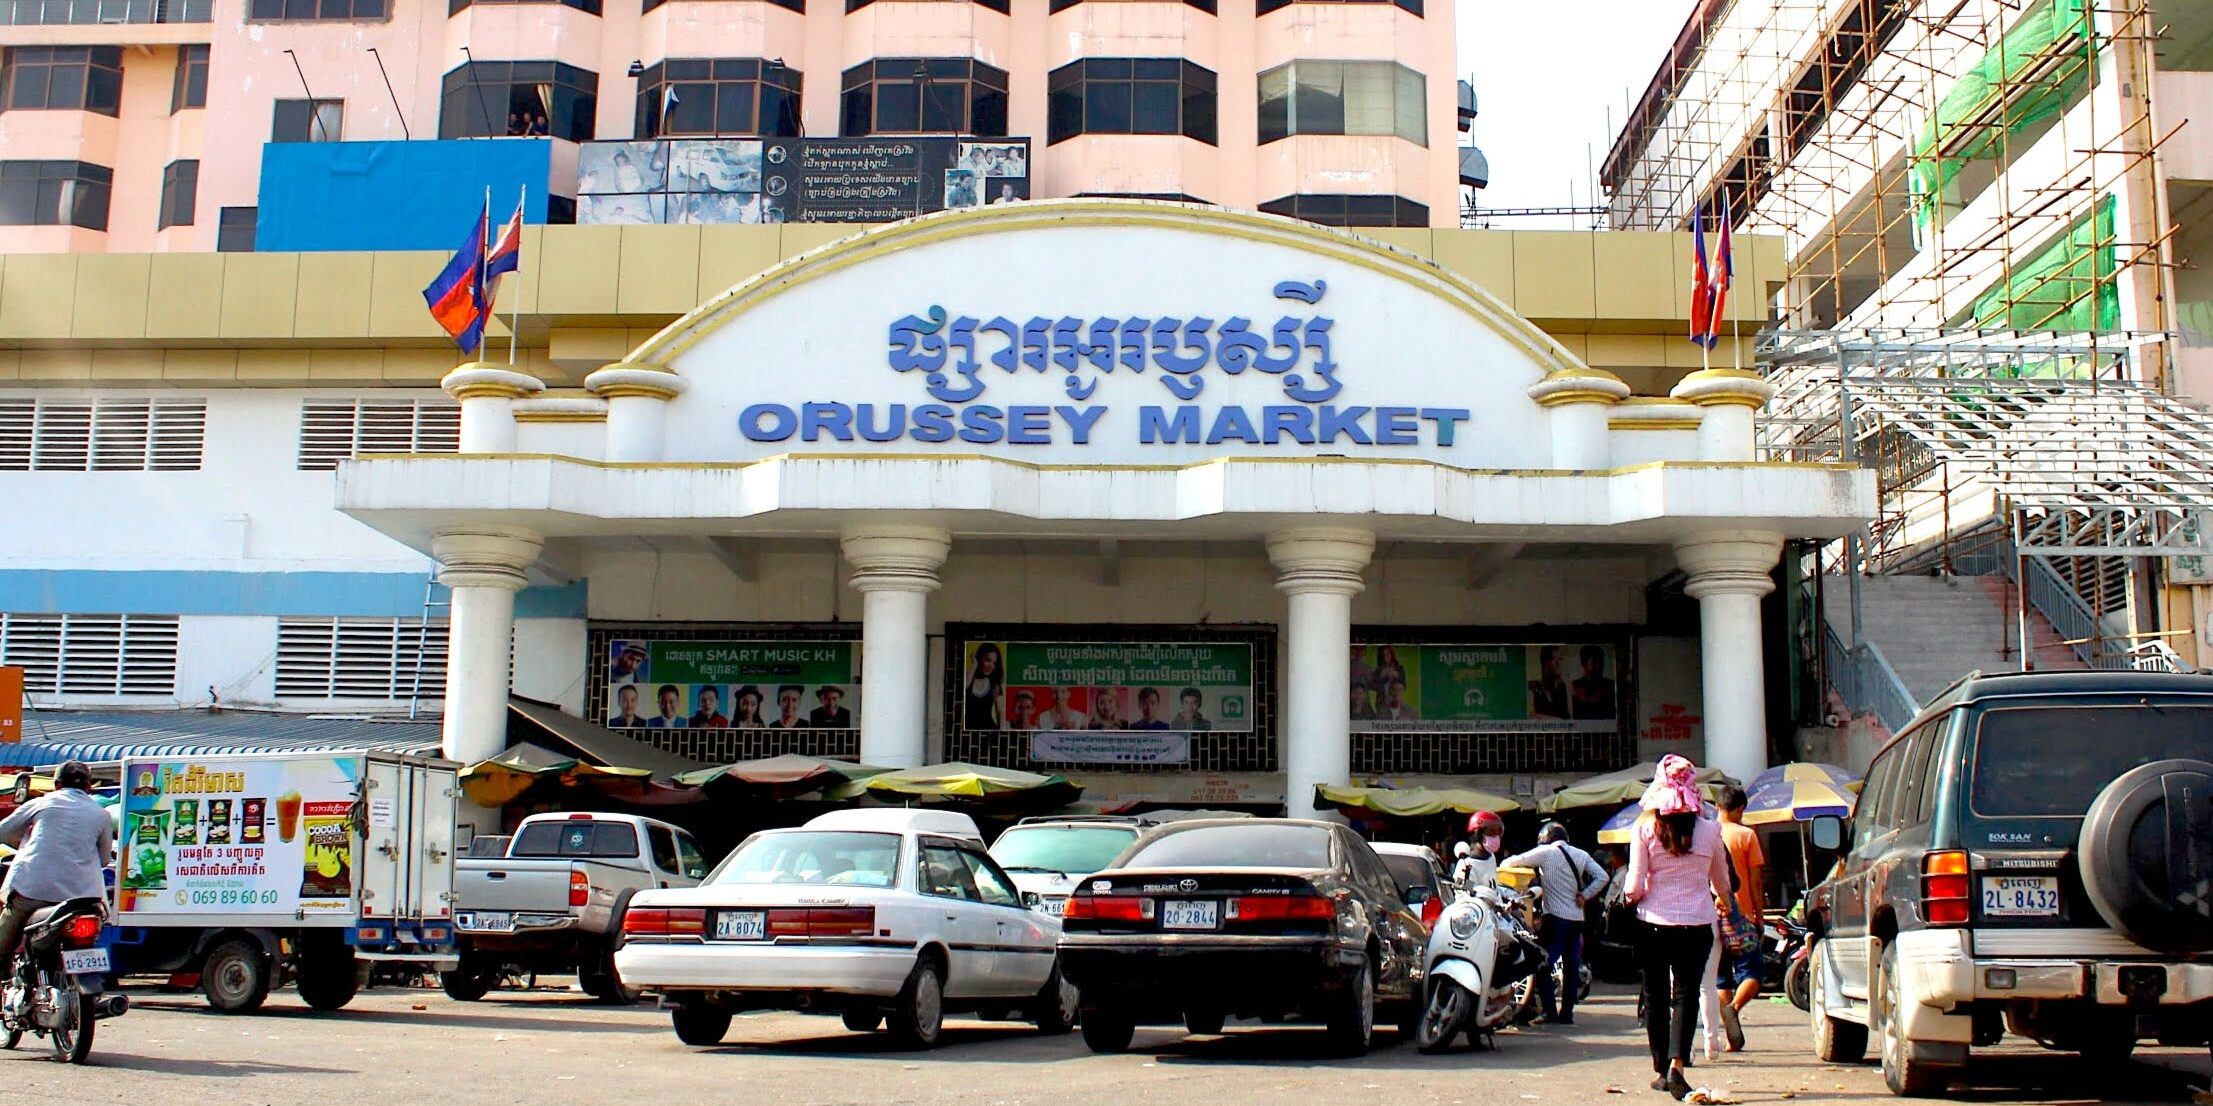 Visit this expansive marketplace for electronic goods and daily necessities【Orussey Market】